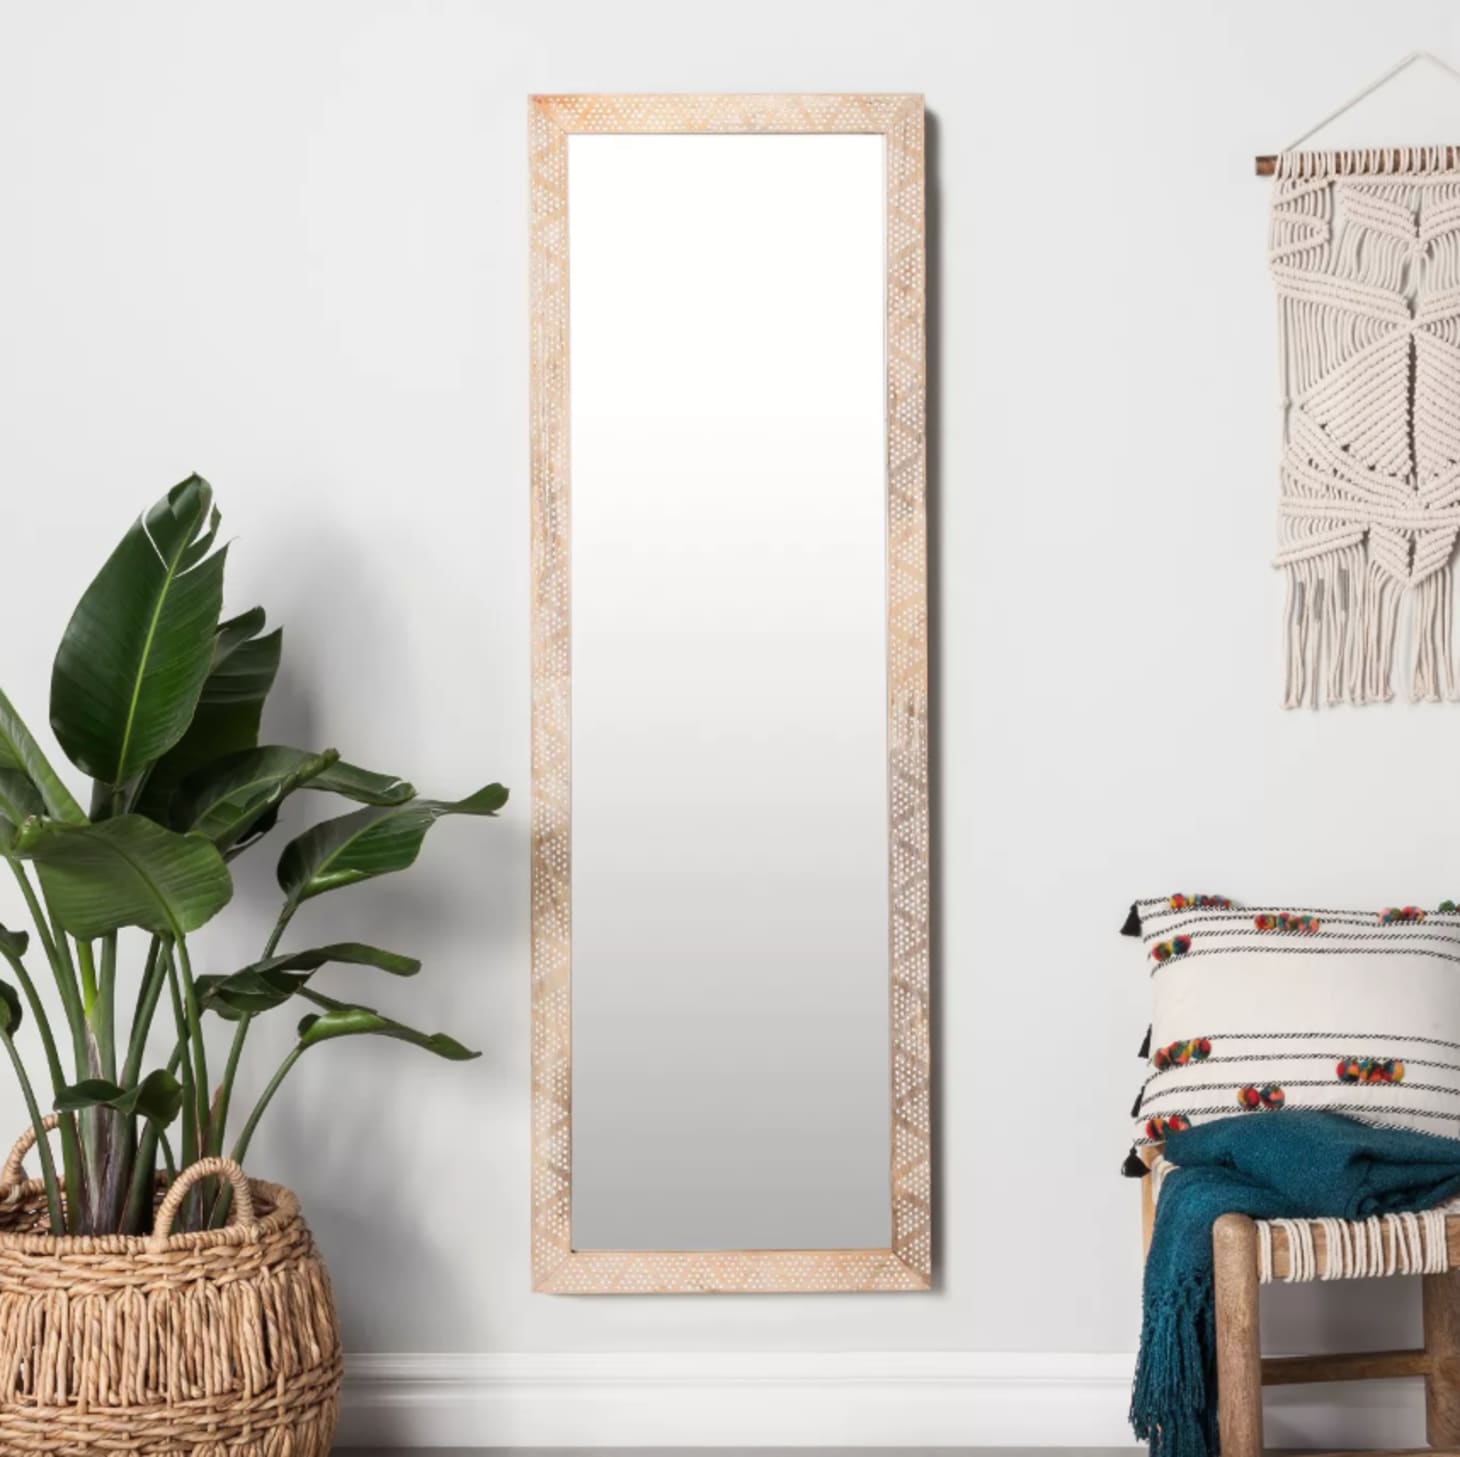 Target Floor Mirror: Illuminate Your Space With Reflective Elegance